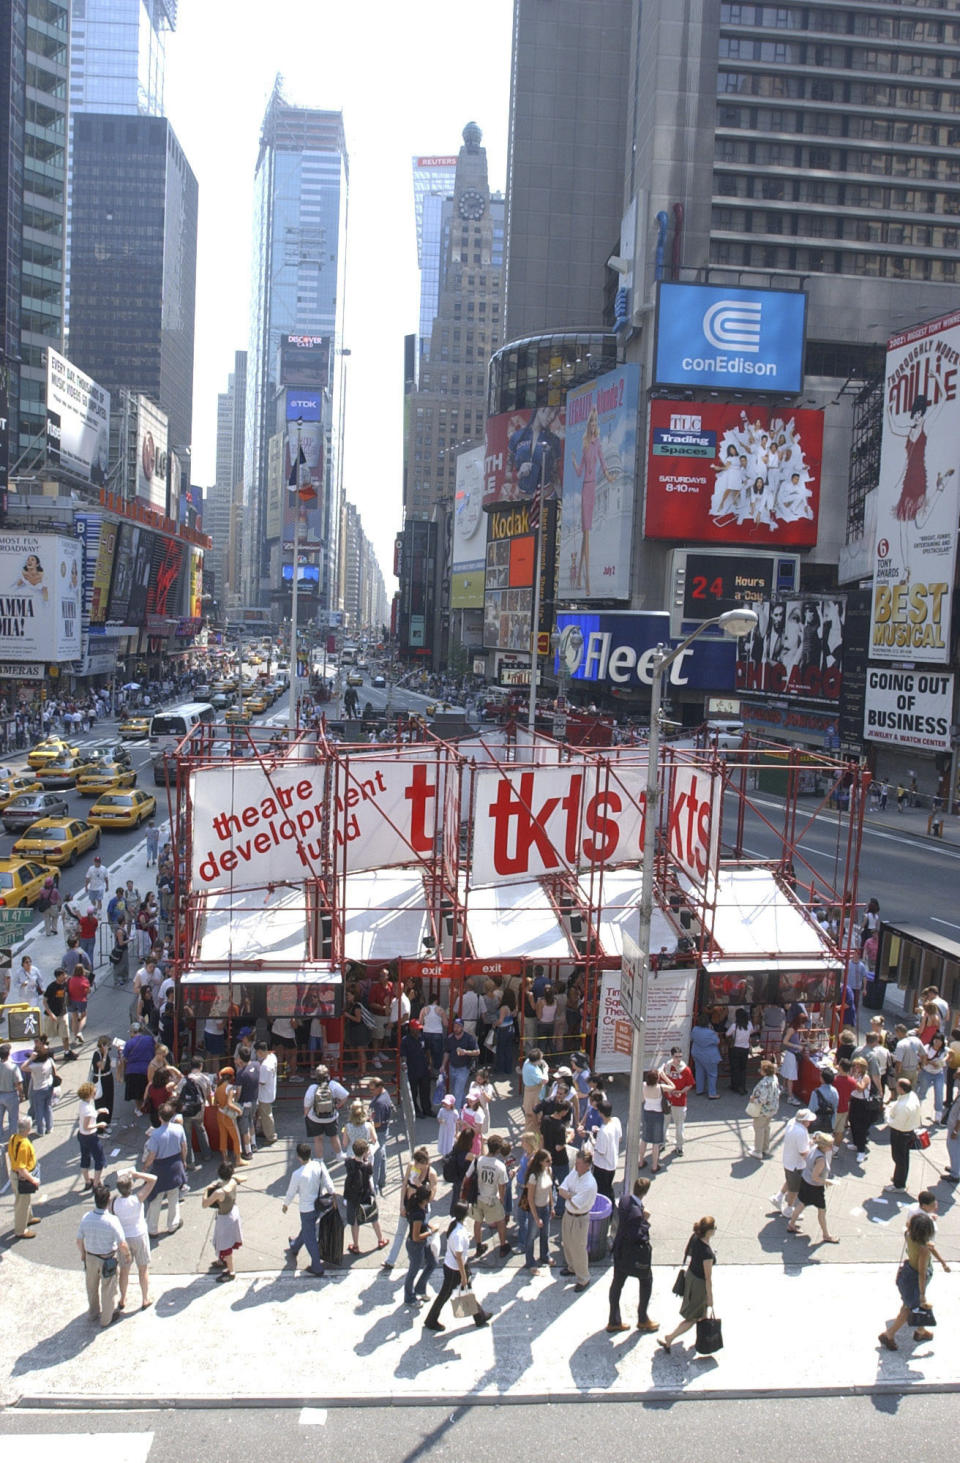 FILE - The TKTS booth appears in New York's Times Square on June 24, 2003. The TKTS booth in Times Square, which has become part of the city's visual and financial DNA and a key part in keeping Broadway going, celebrates its 50th birthday this week. (AP Photo/Mary Altaffer, File)